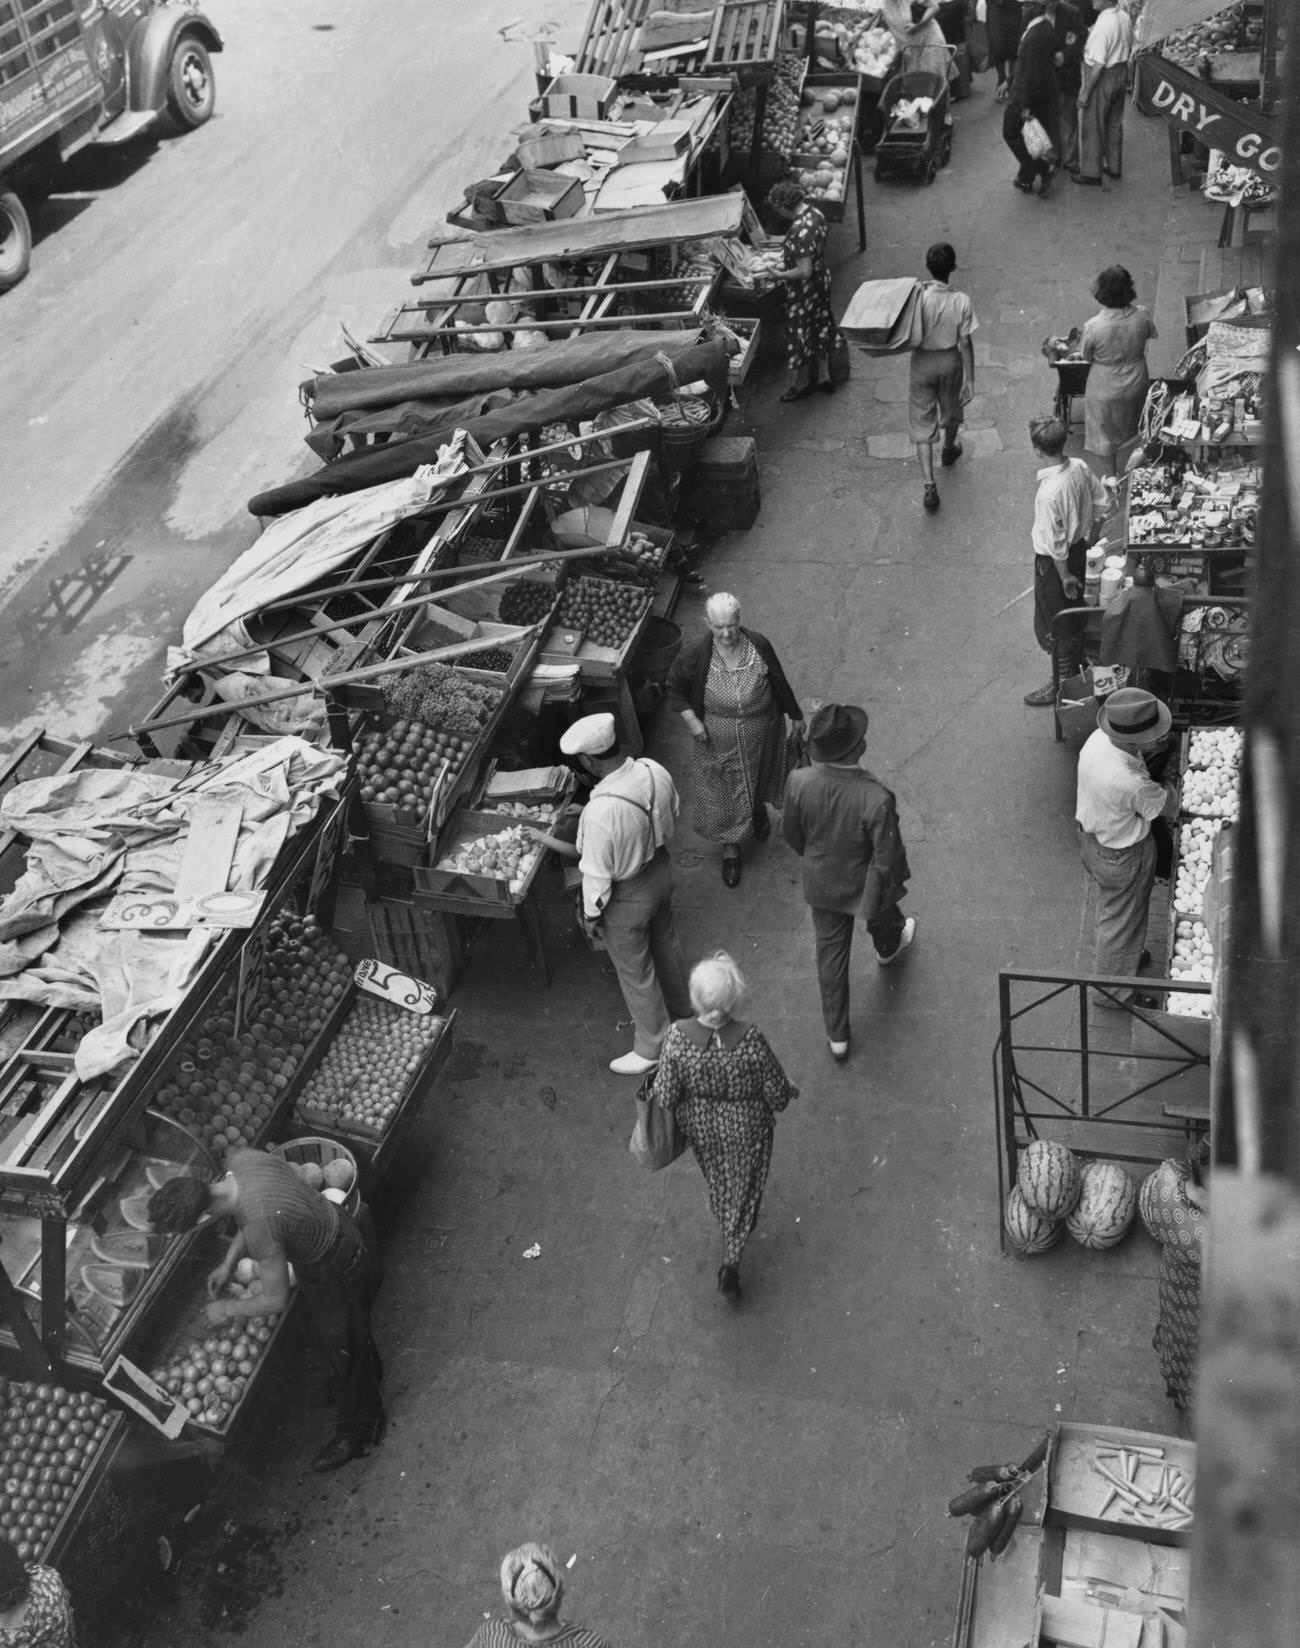 Shoppers At Brownsville Marketplace, Brooklyn, 1951.